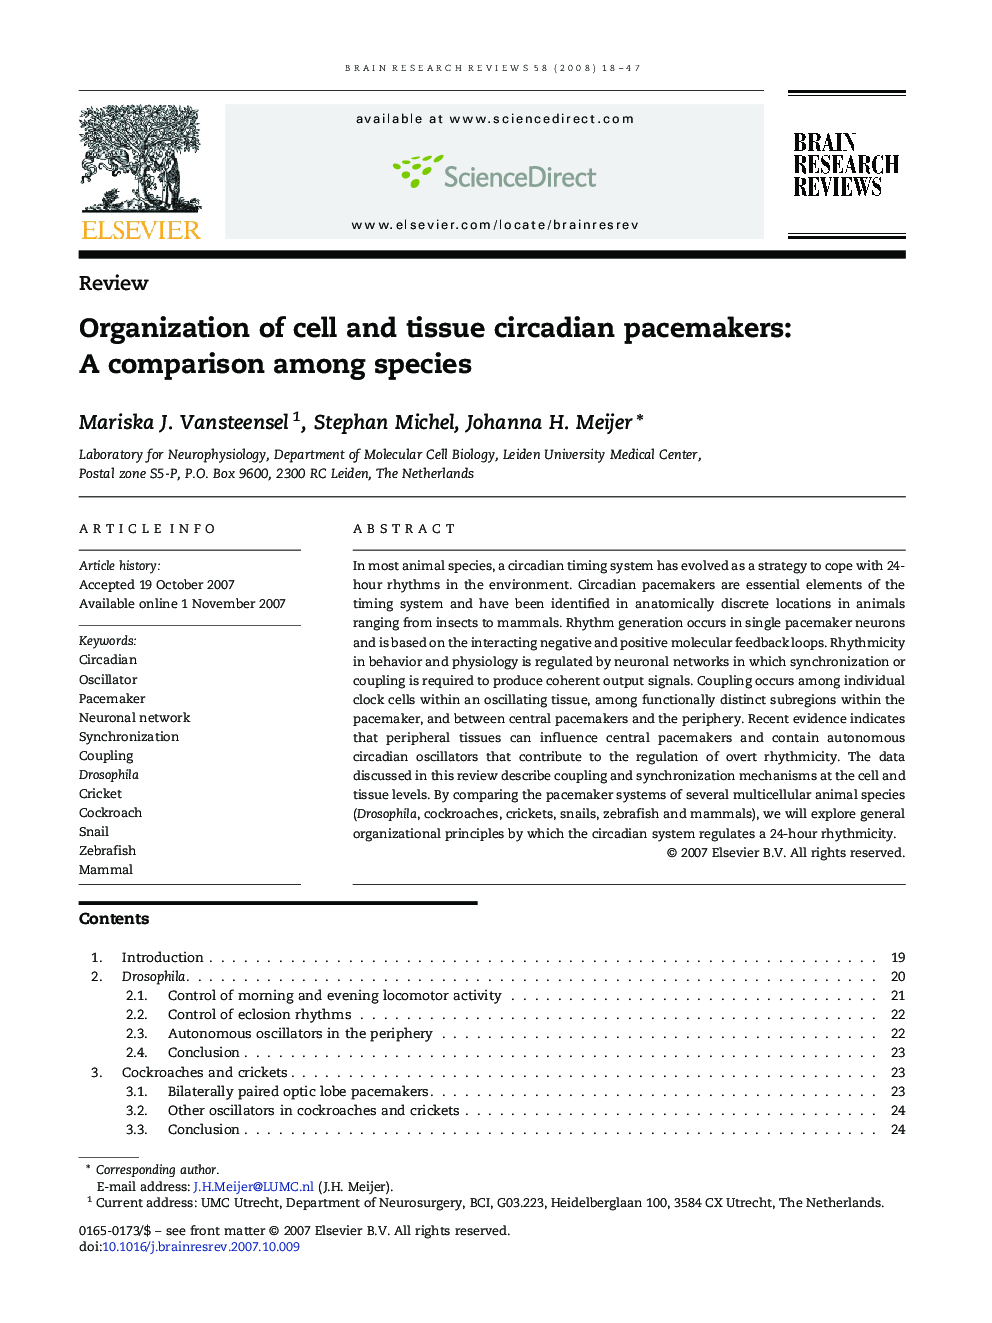 Organization of cell and tissue circadian pacemakers: A comparison among species